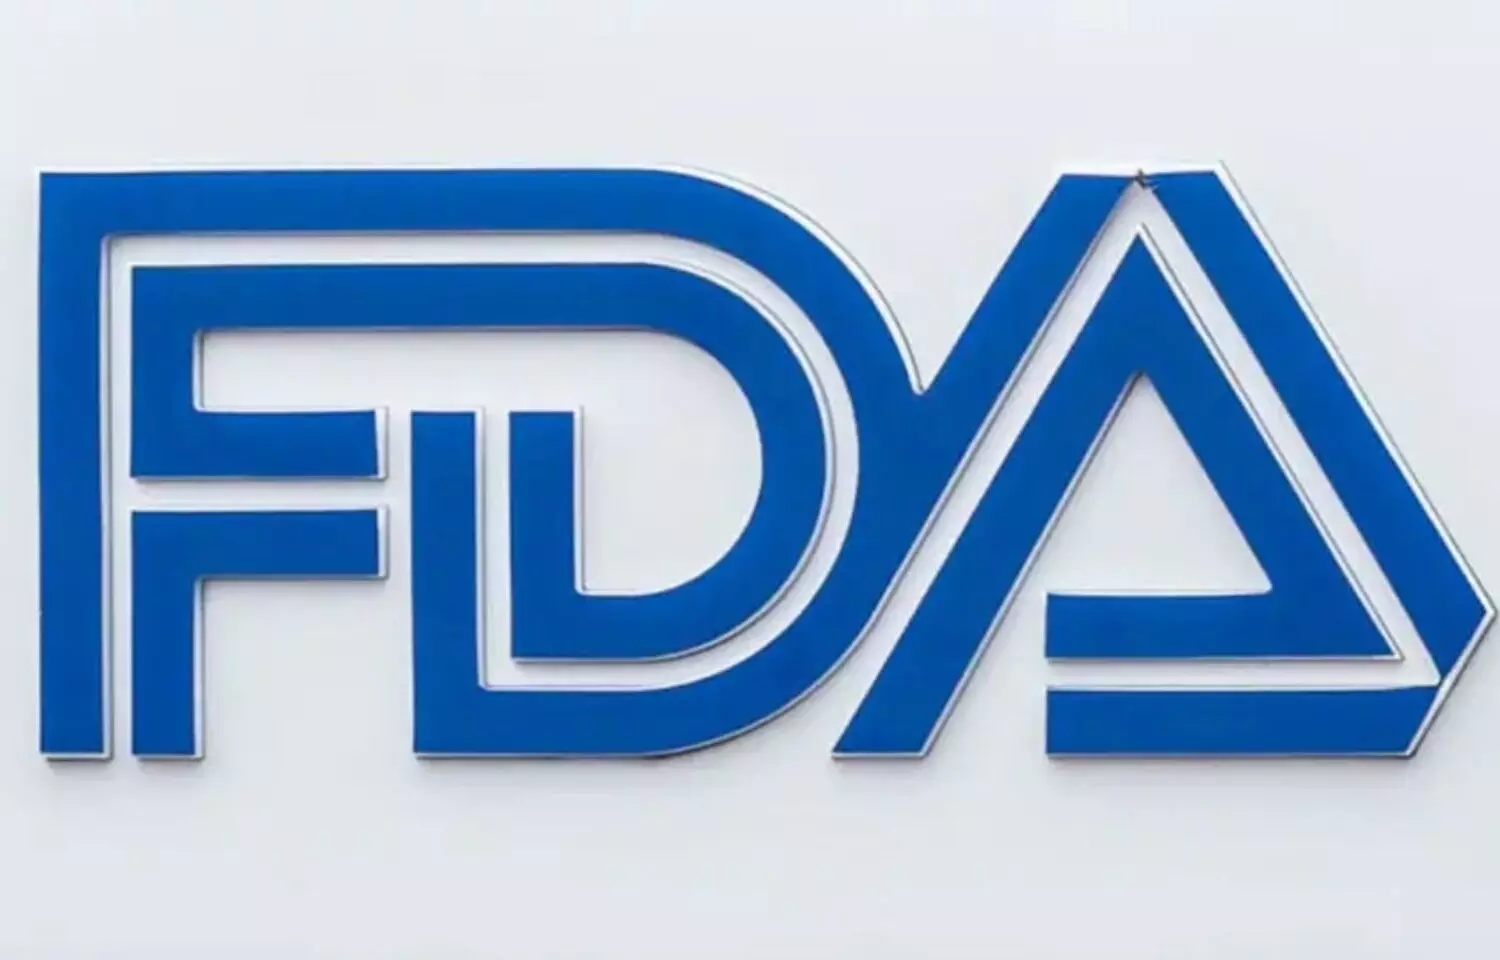 FDA approves third dose of Pfizer COVID-19 vaccine for kids between 5 to 11 years